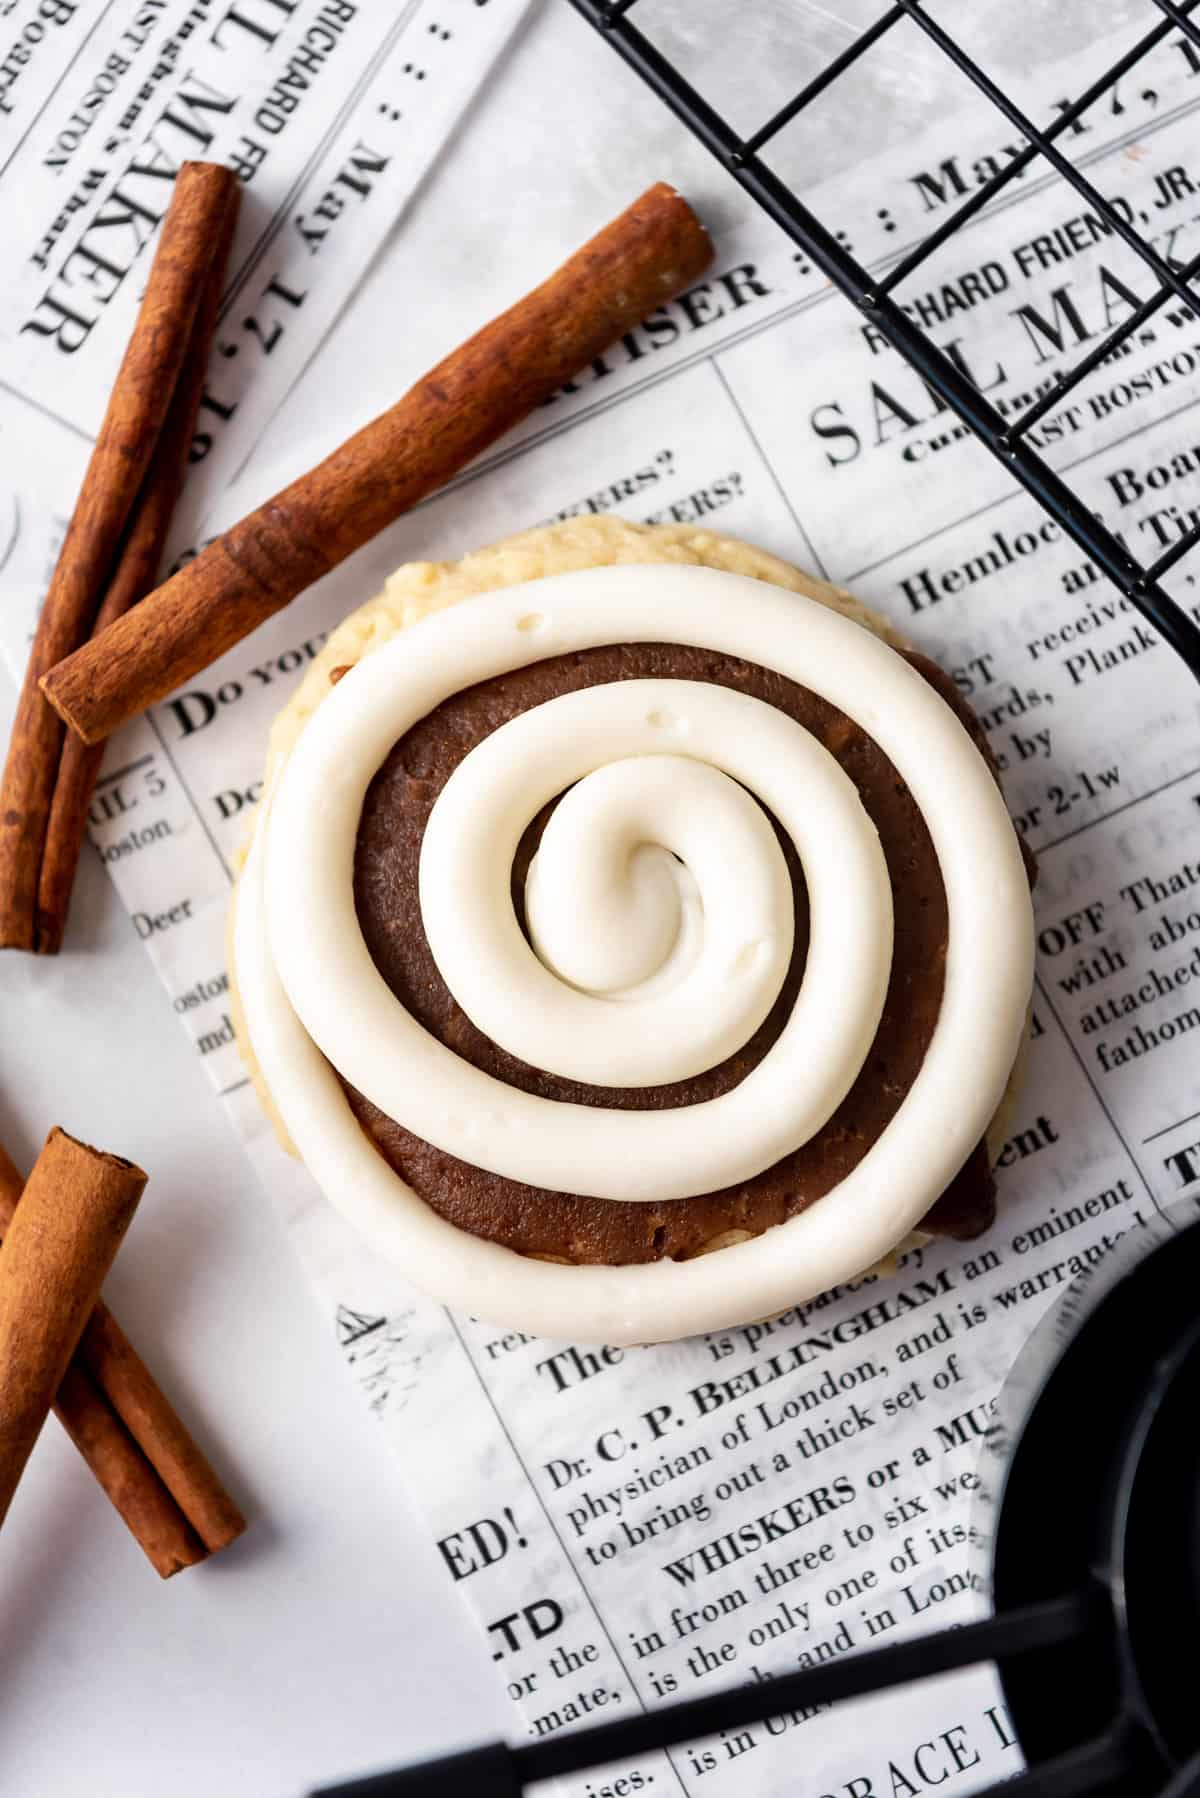 A cinnamon roll cookie with a swirl of cream cheese frosting piped on top sitting on newsprint.